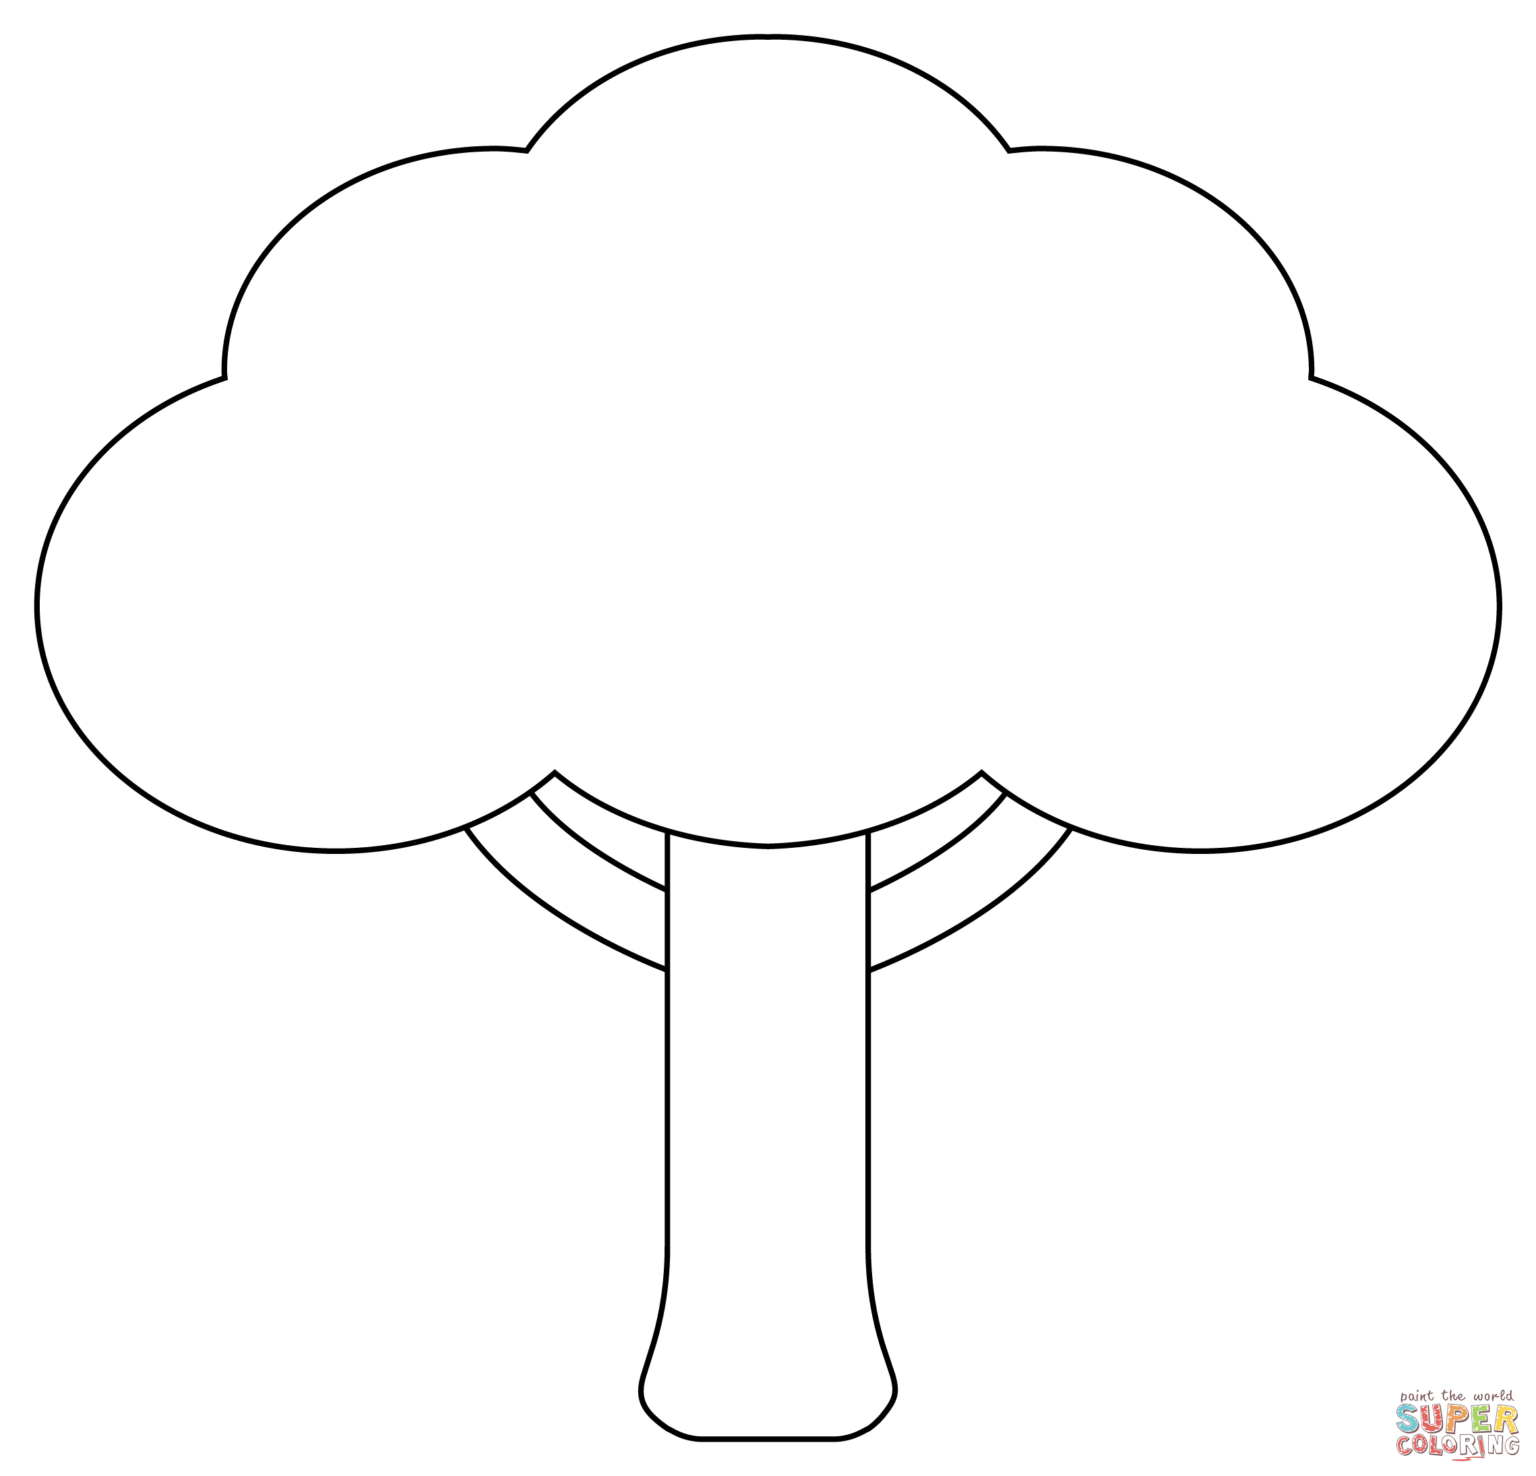 Simple Tree Coloring Page Free Printable Coloring Pages - Fillable Form ...